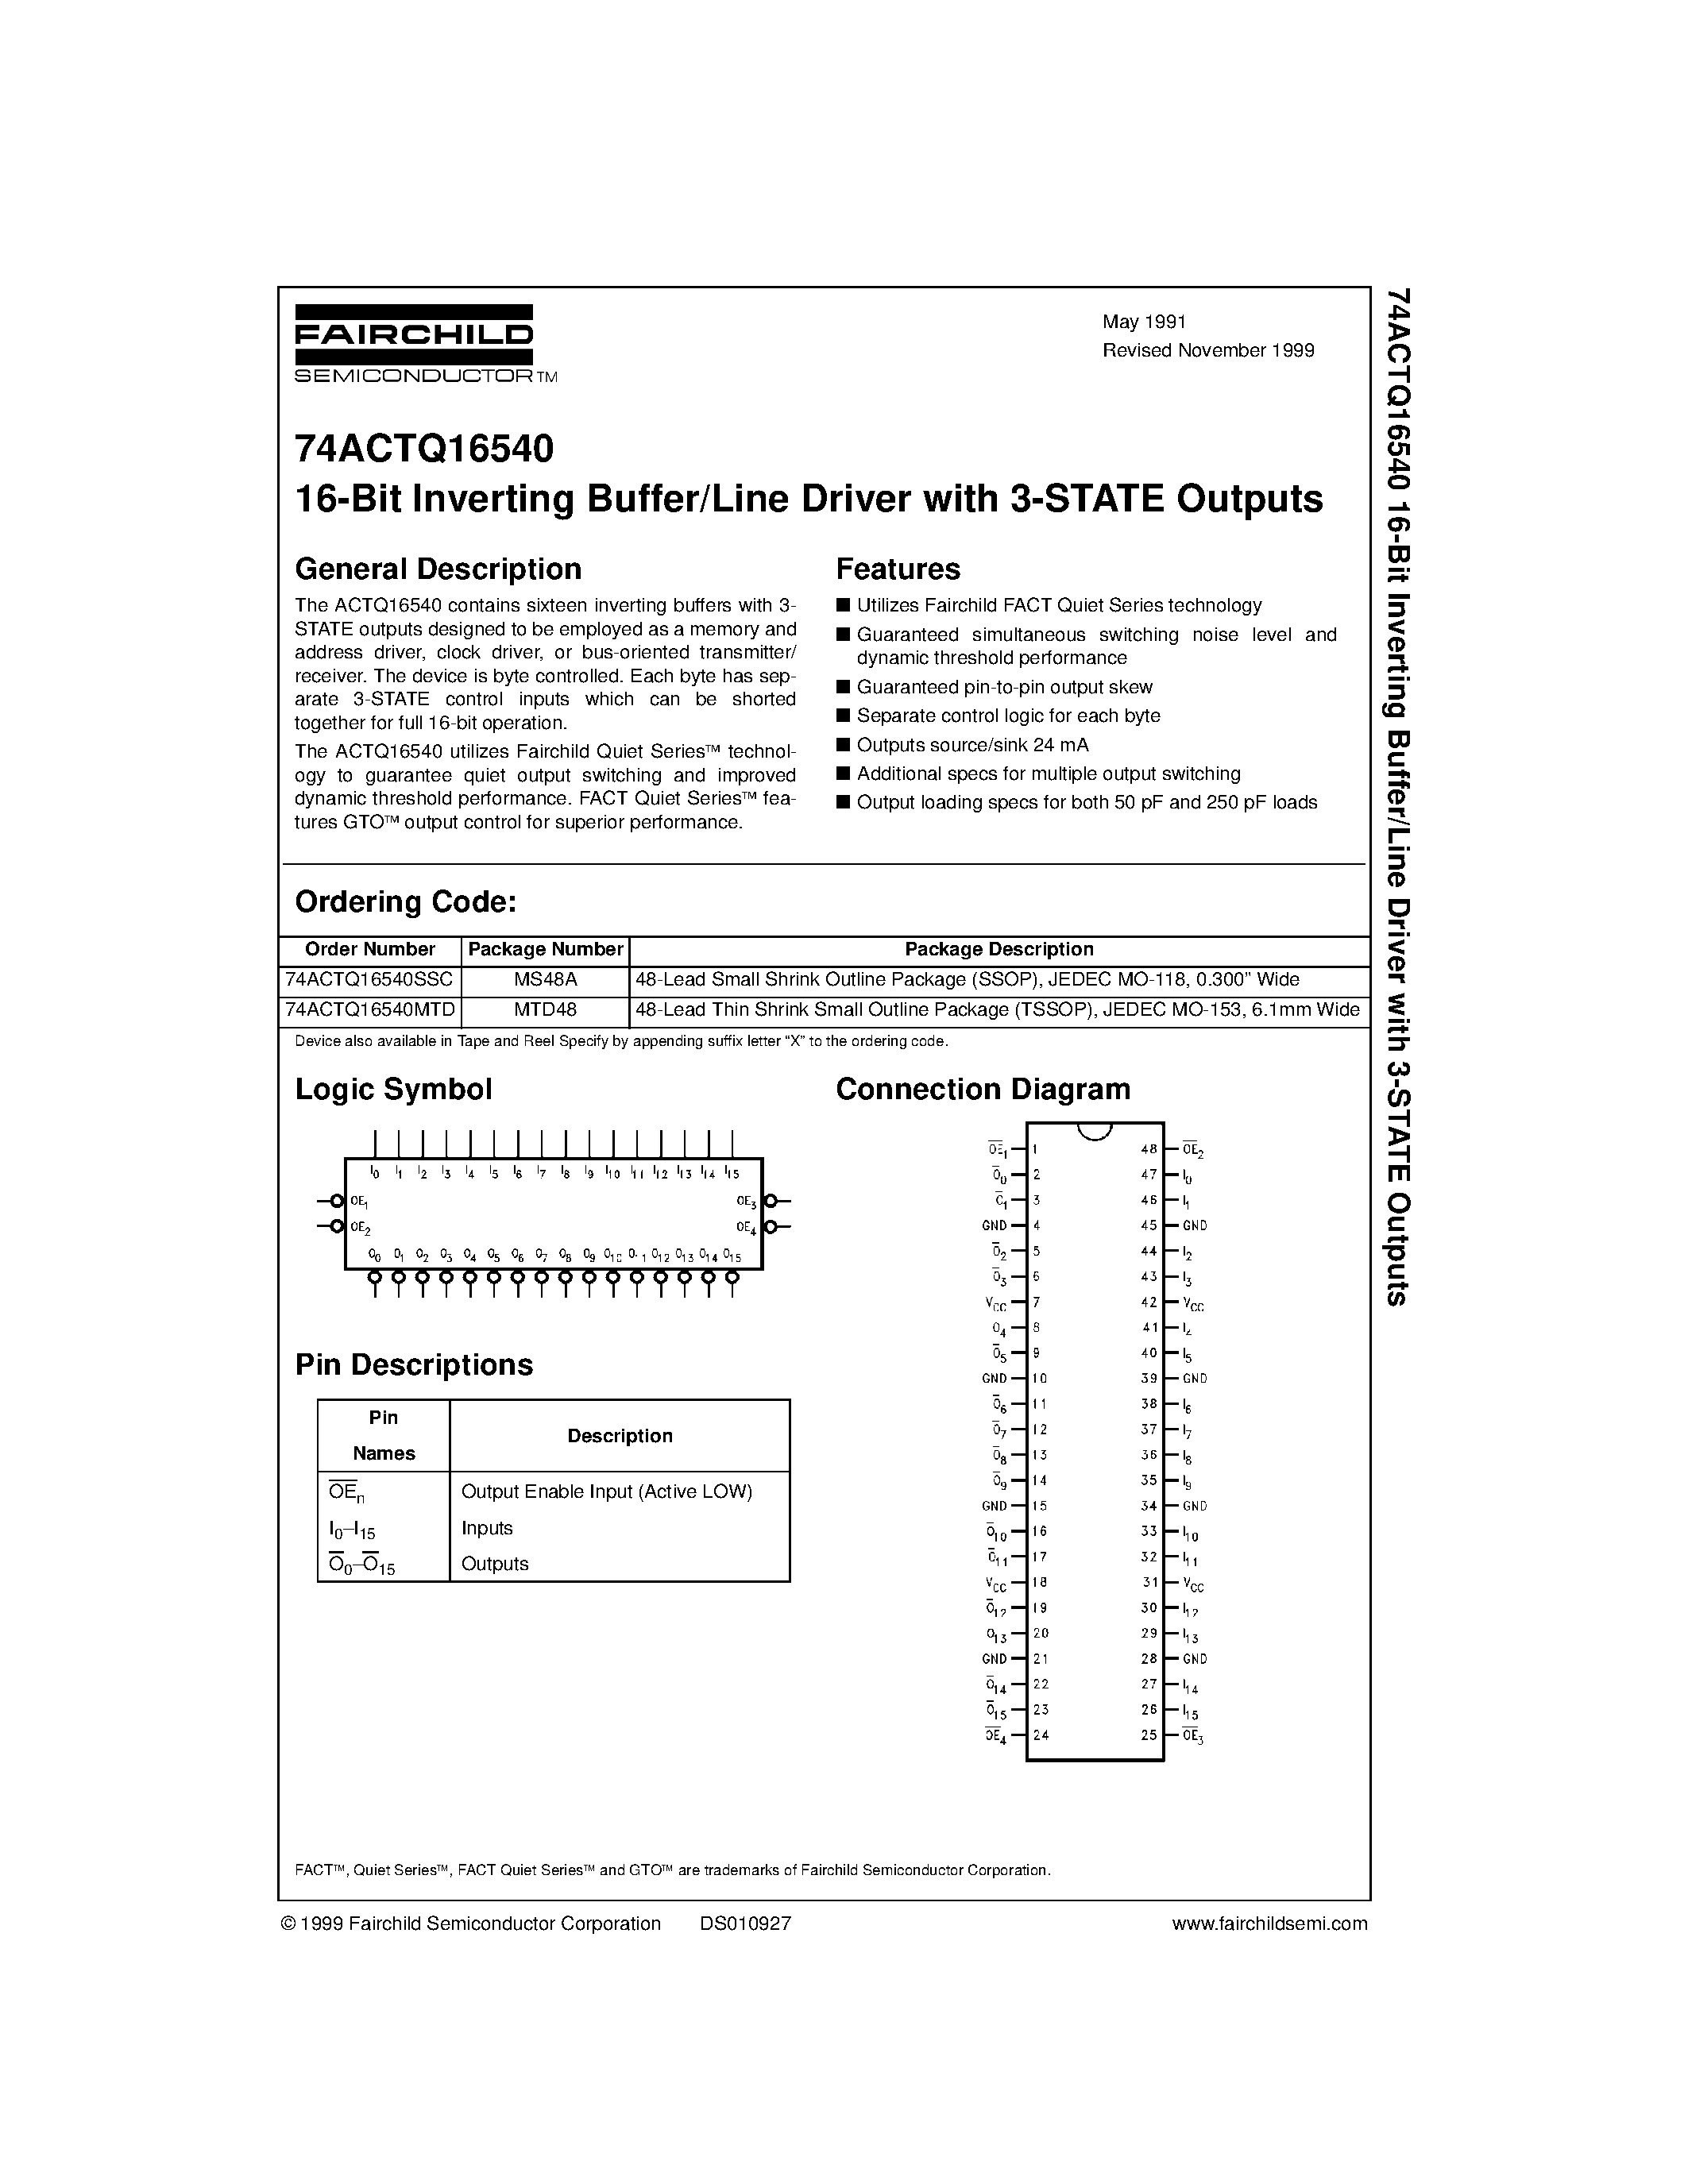 Datasheet 74ACTQ16540SSC - 16-Bit Inverting Buffer/Line Driver with 3-STATE Outputs page 1